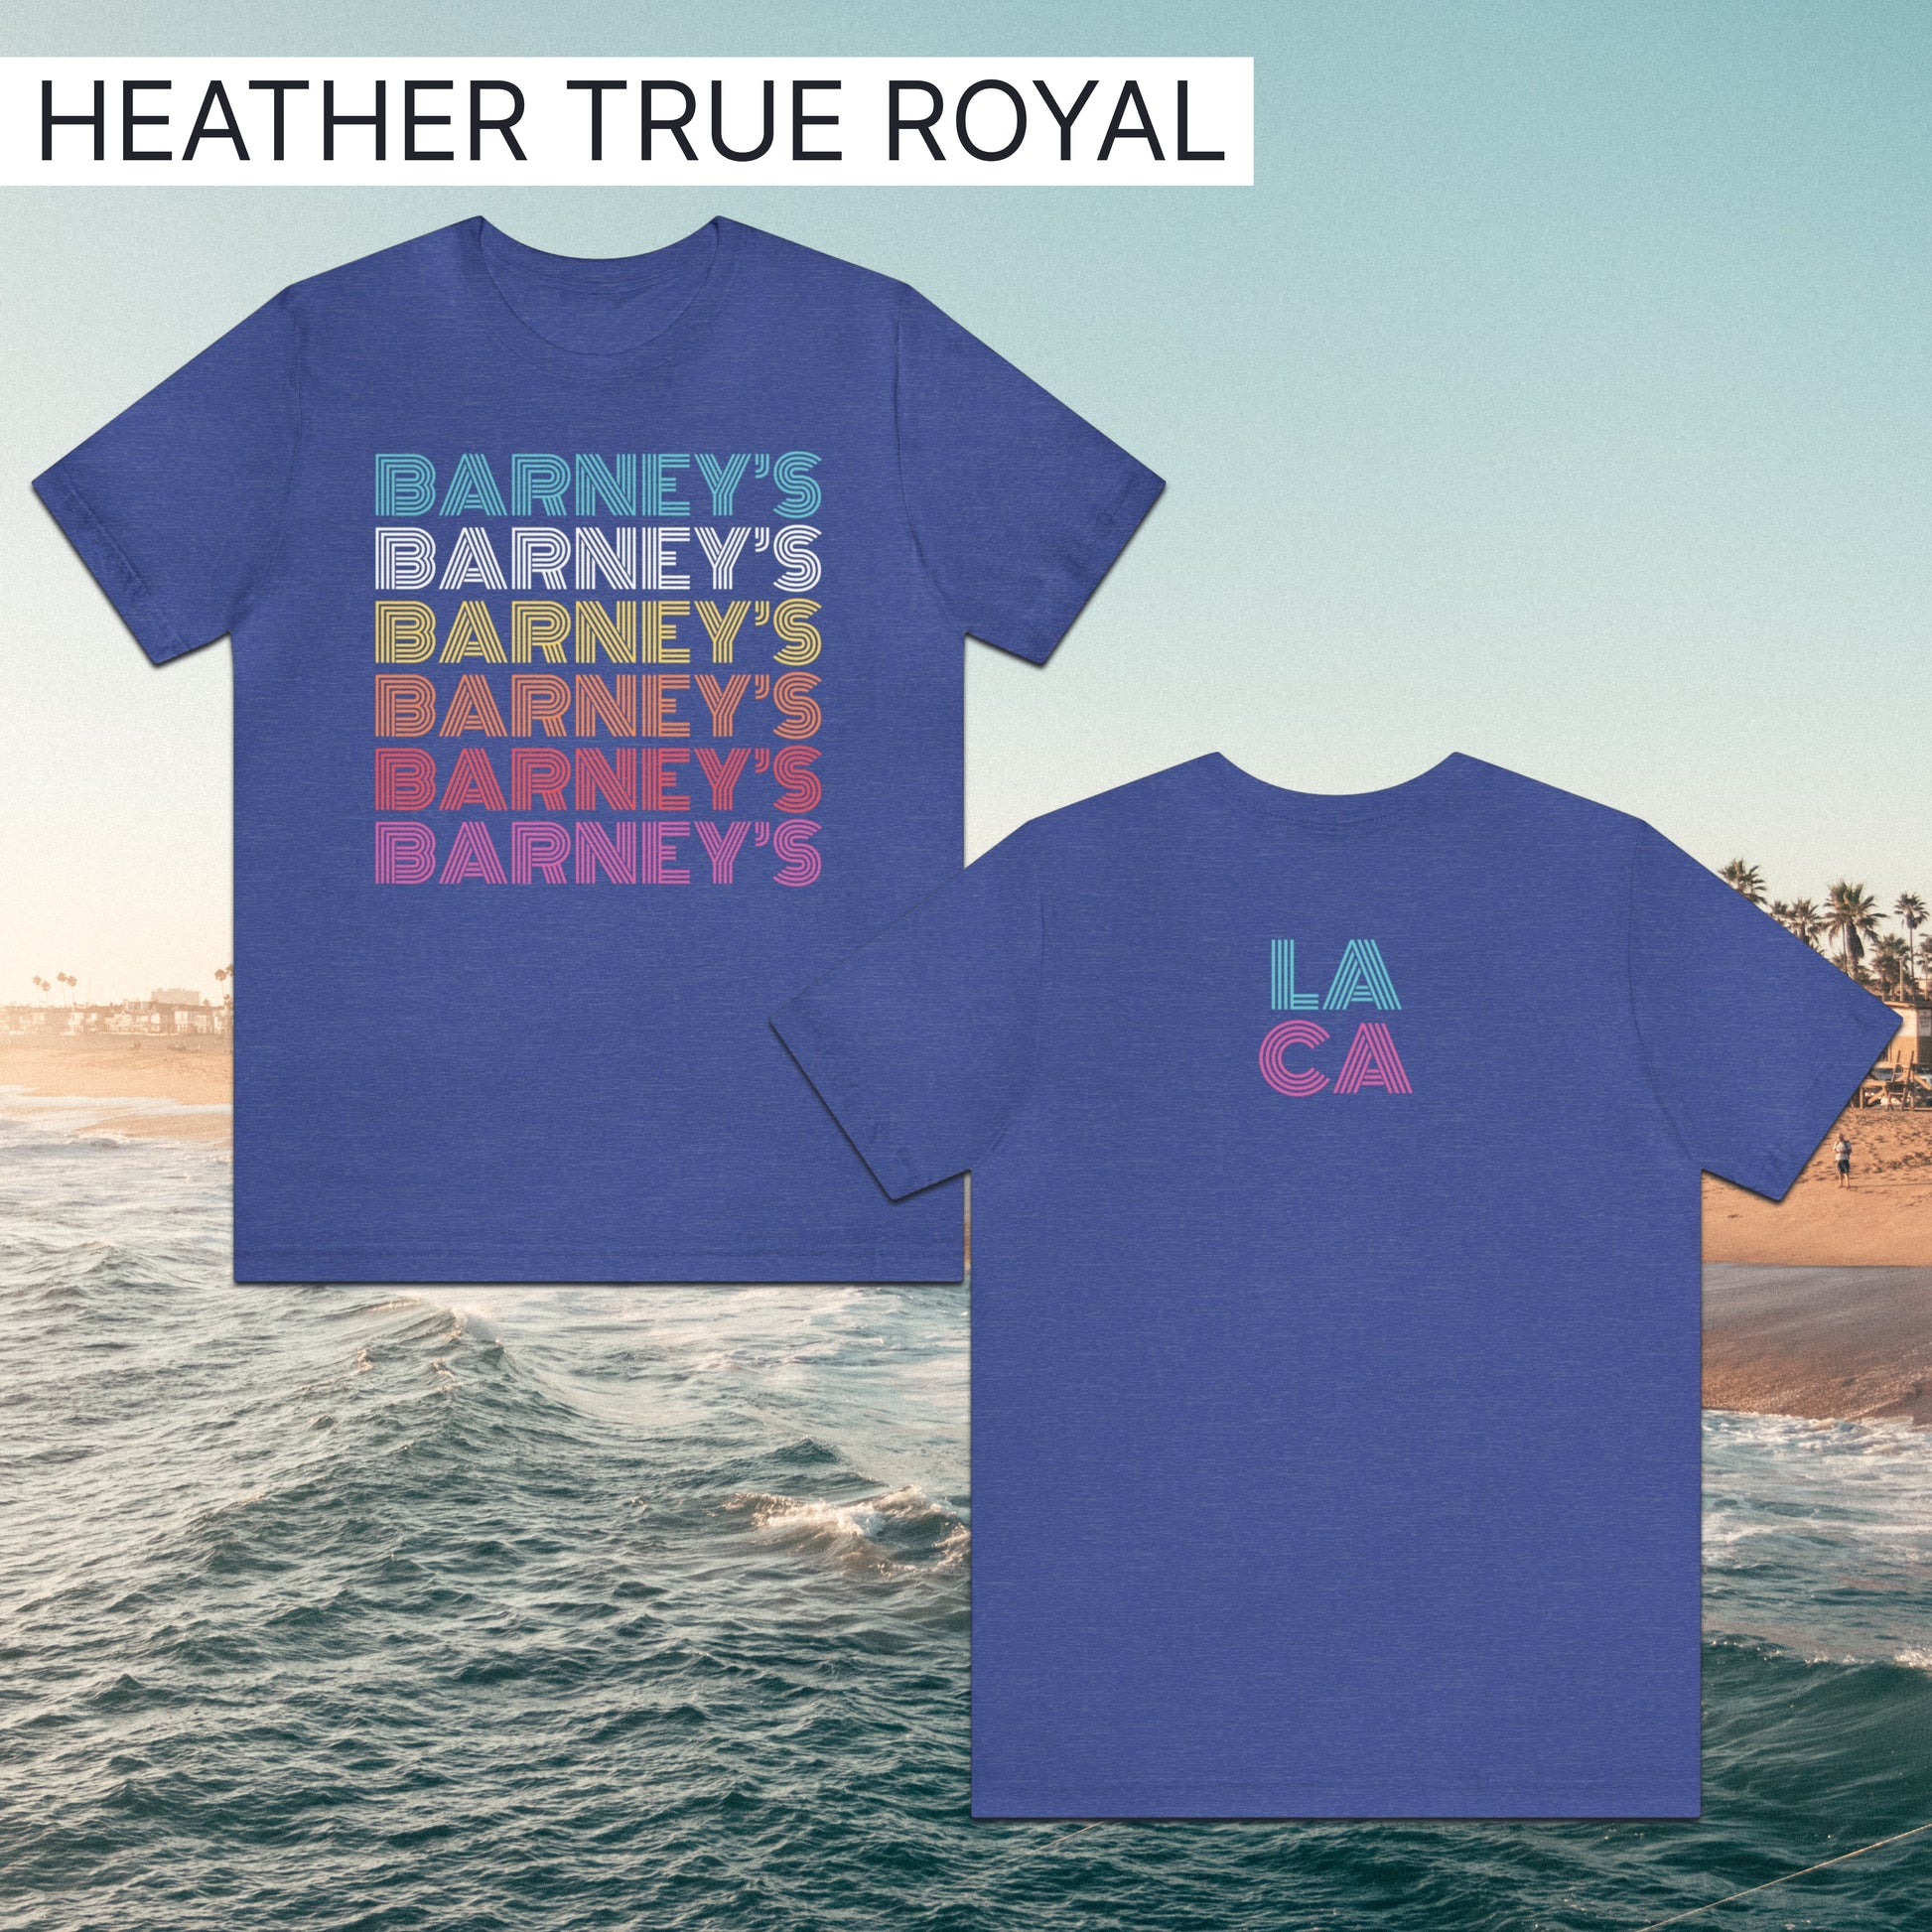 Barney's x6 Retro Hollywood | BARNEY'S BEANERY - Men's Retro Graphic Tee | Heather True Royal Bella+Canvas 3001 T-Shirt - Front And Back Flat Lay View